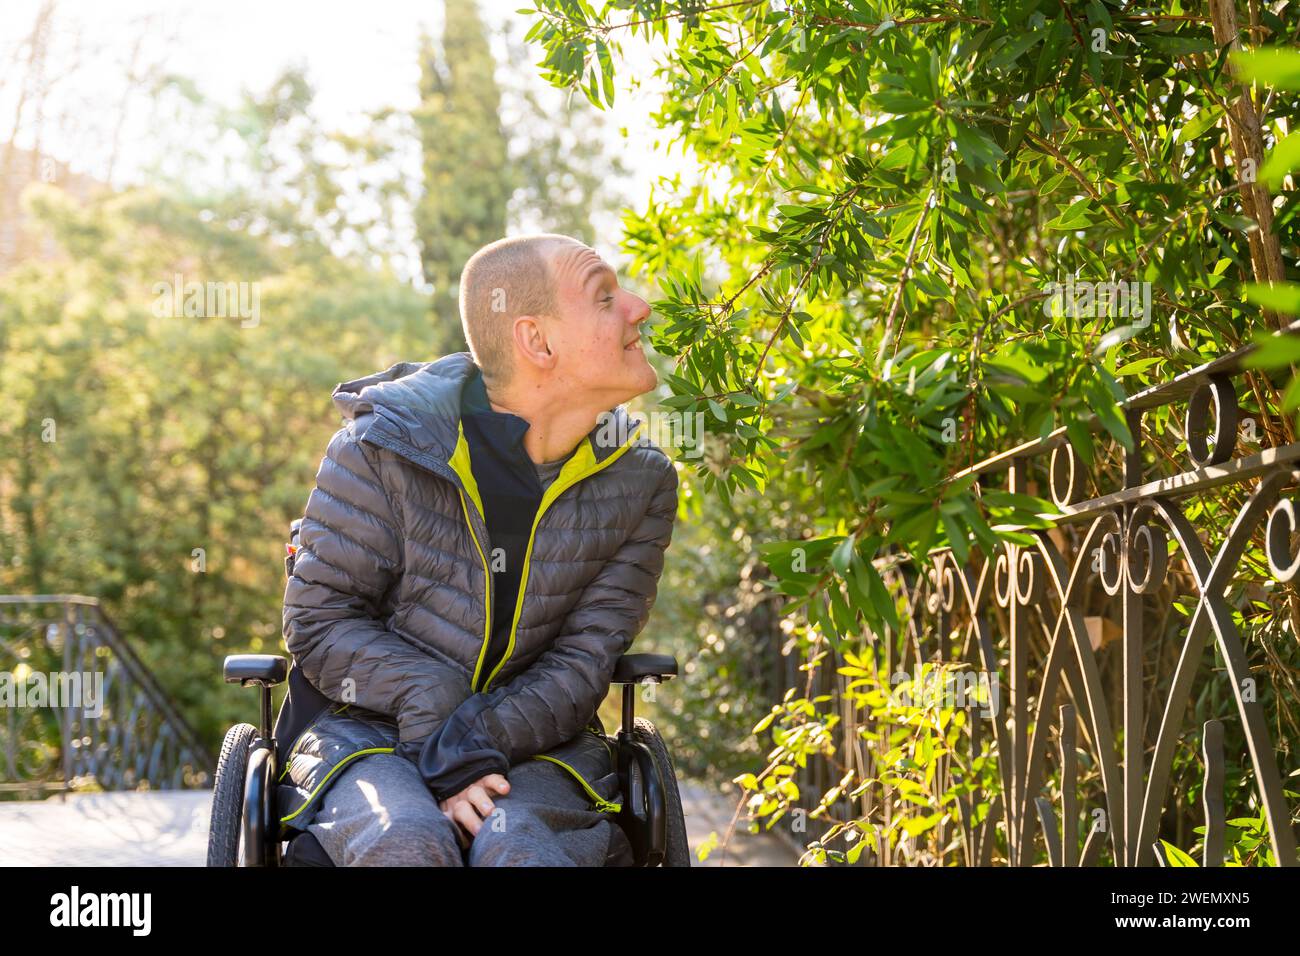 Happy disabled man in wheelchair enjoying while smelling a plant in an urban park during a sunny day of winter Stock Photo